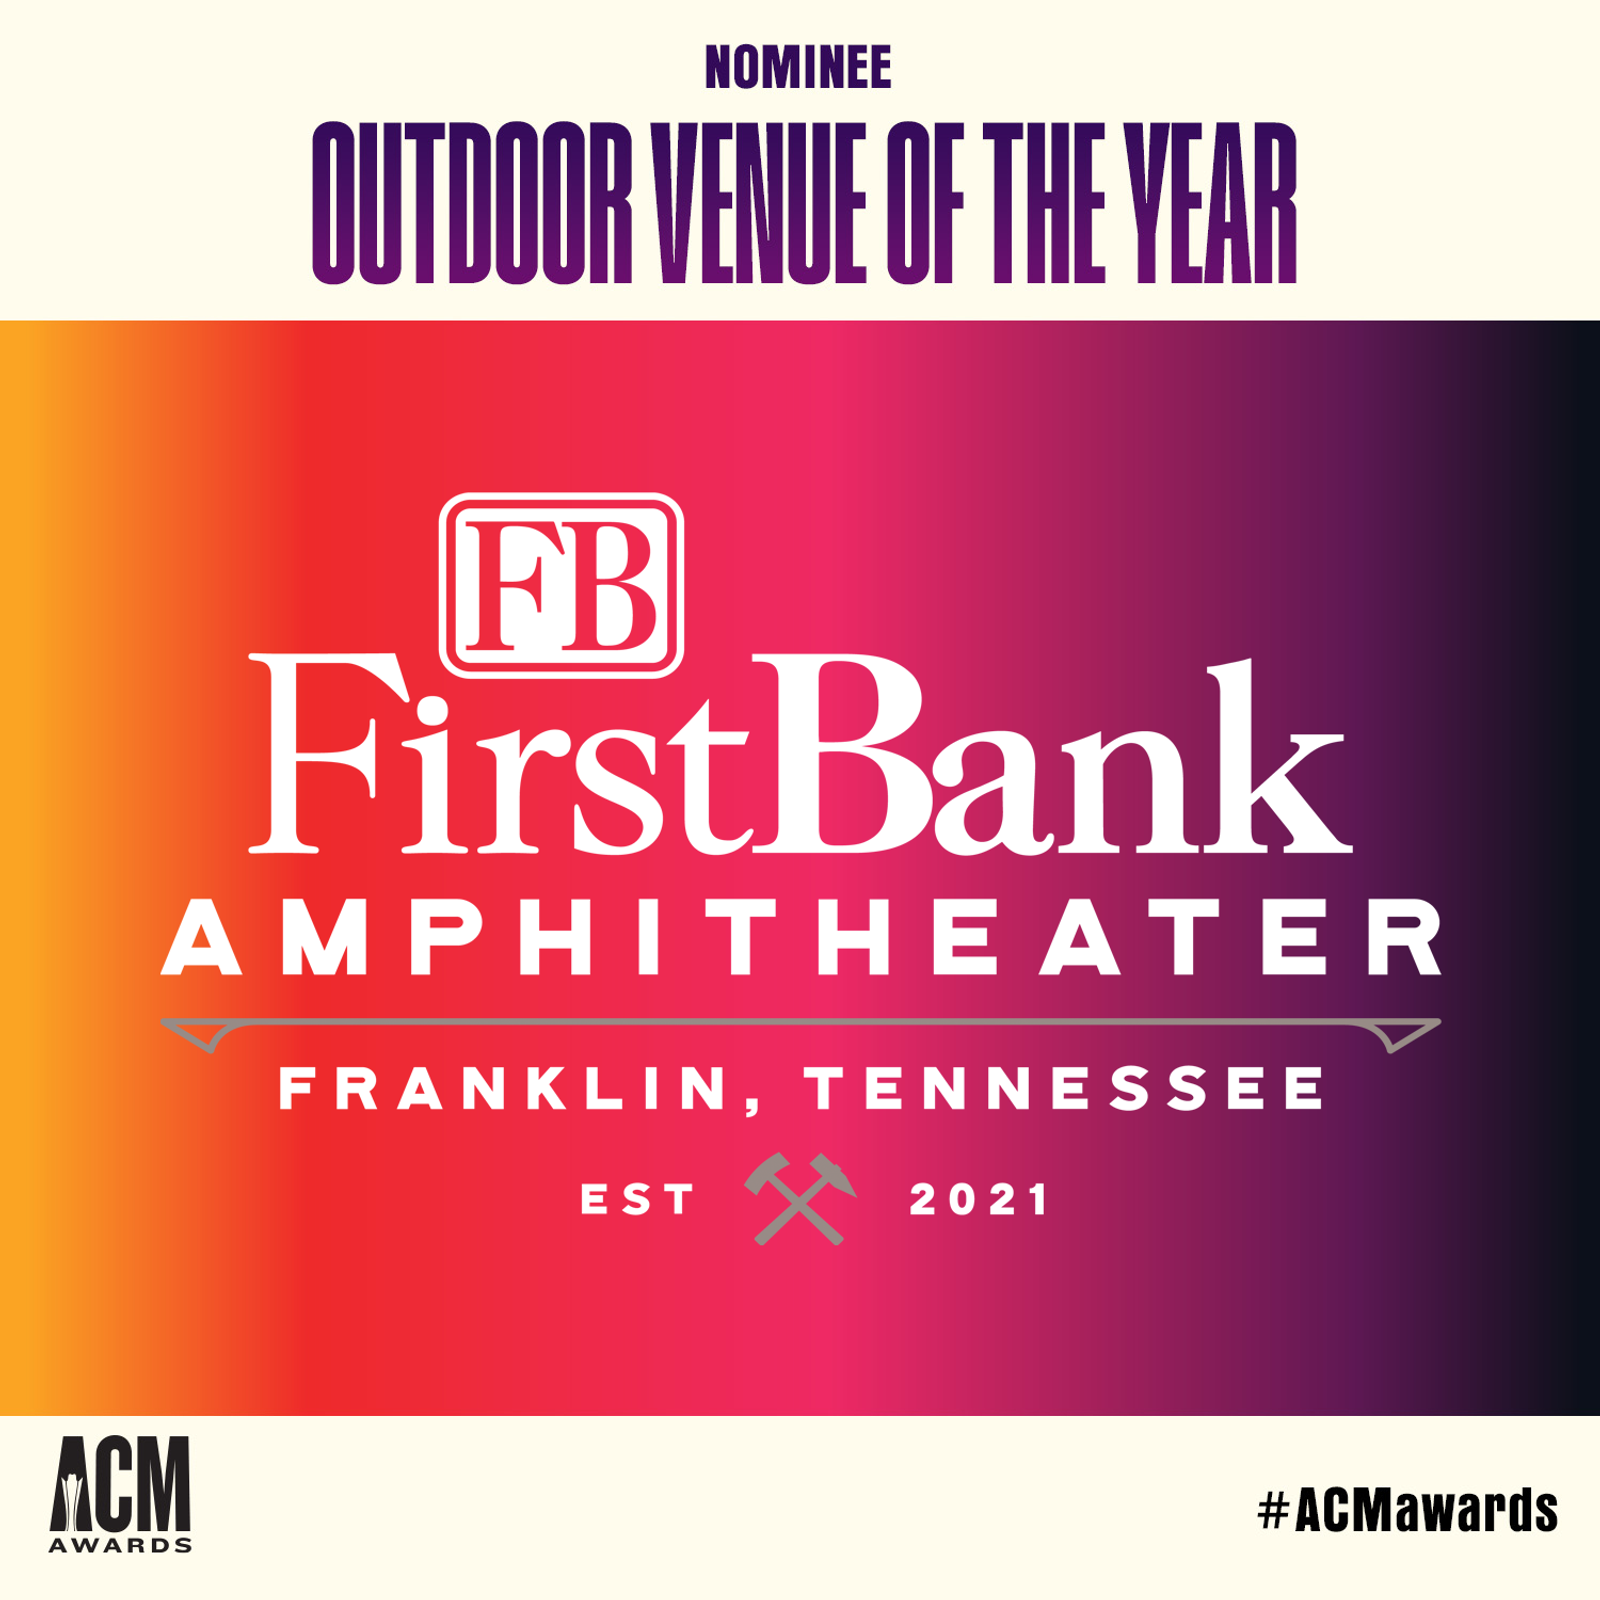 FirstBank Amphitheater has been nominated for Outdoor Venue of the Year for the 58th ACM Awards